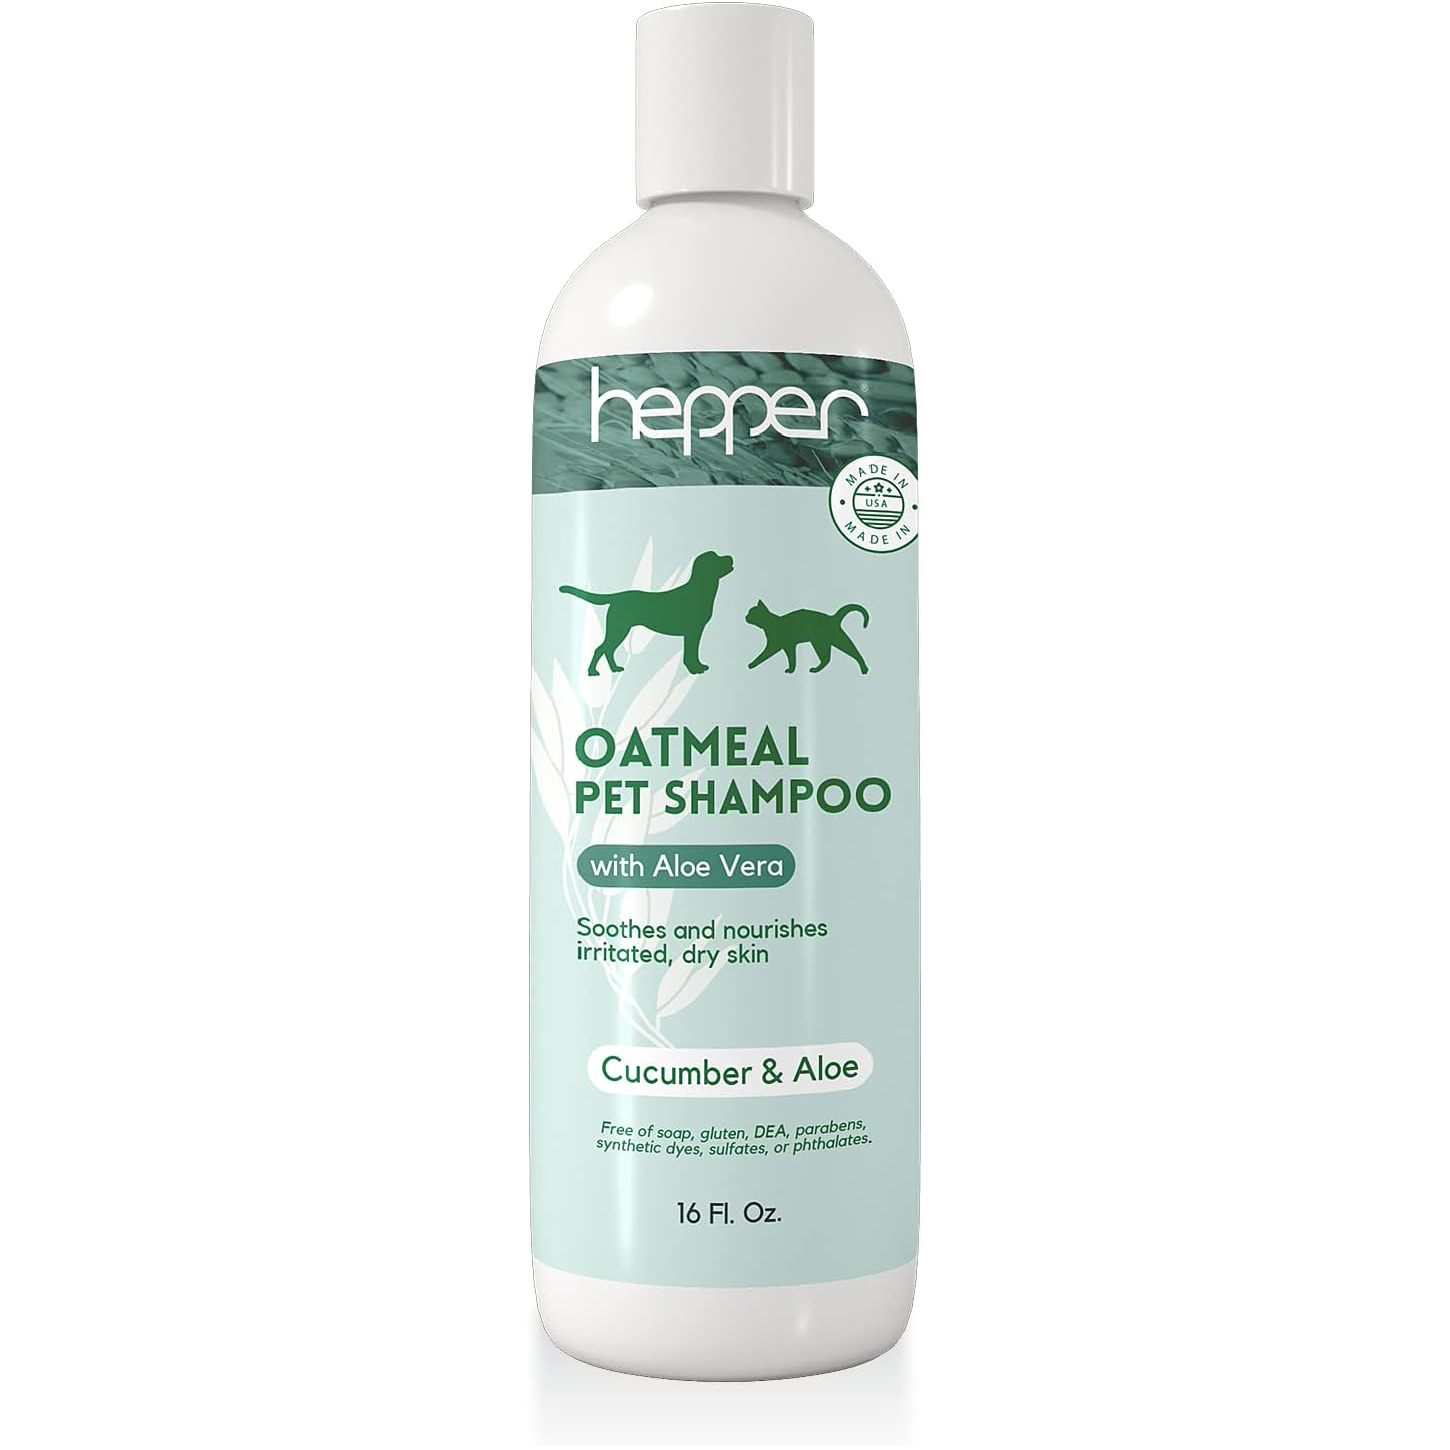 Hepper Oatmeal Shampoo for Dogs, Cats and Other Pets